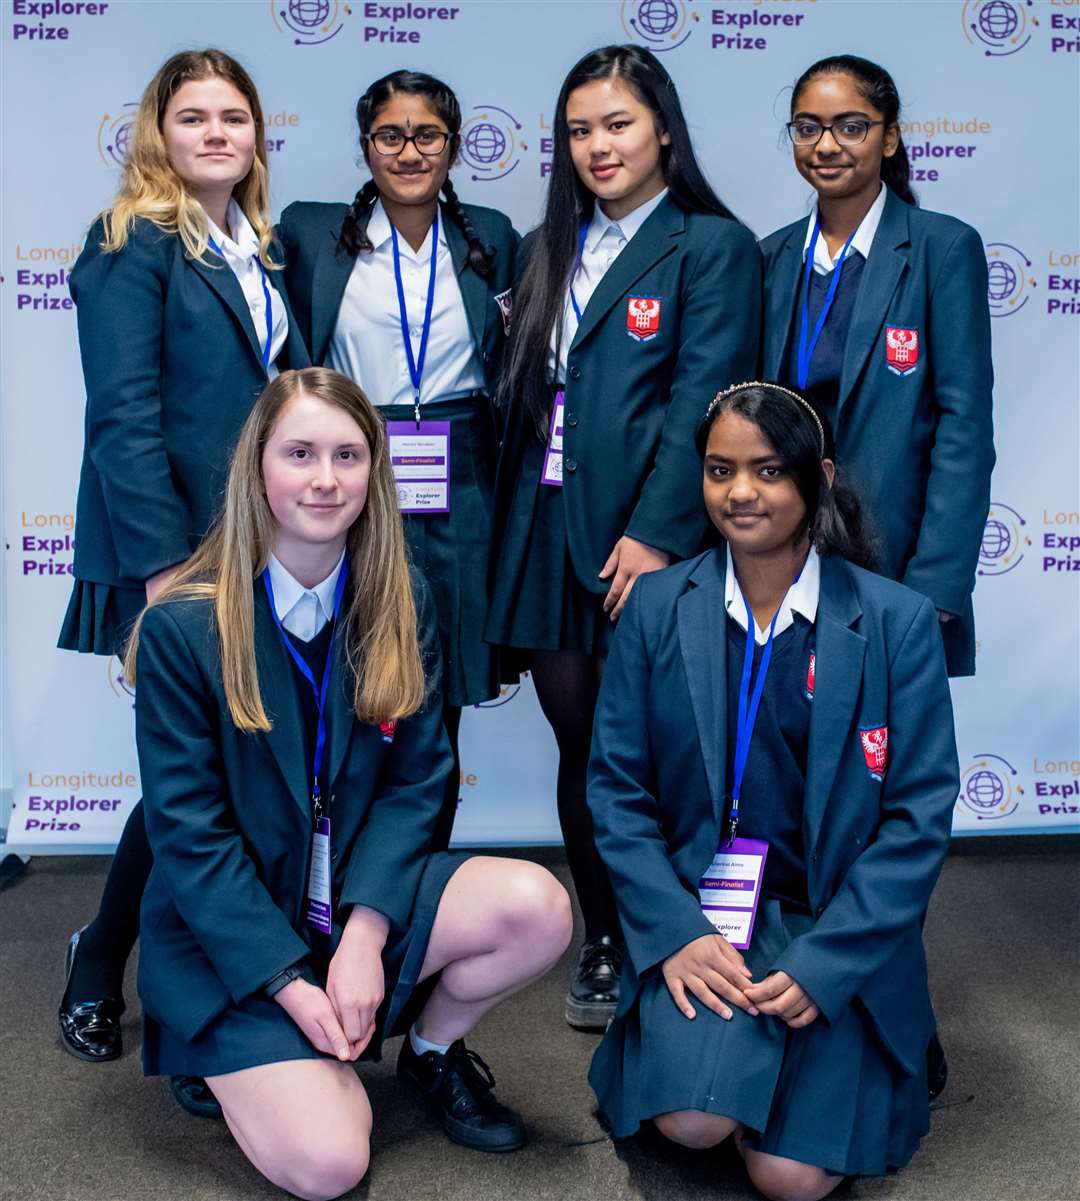 Tech Sisters from Dover Grammar School for Girls are finalists in the Longitude Explorer Prize People’s Choice Award